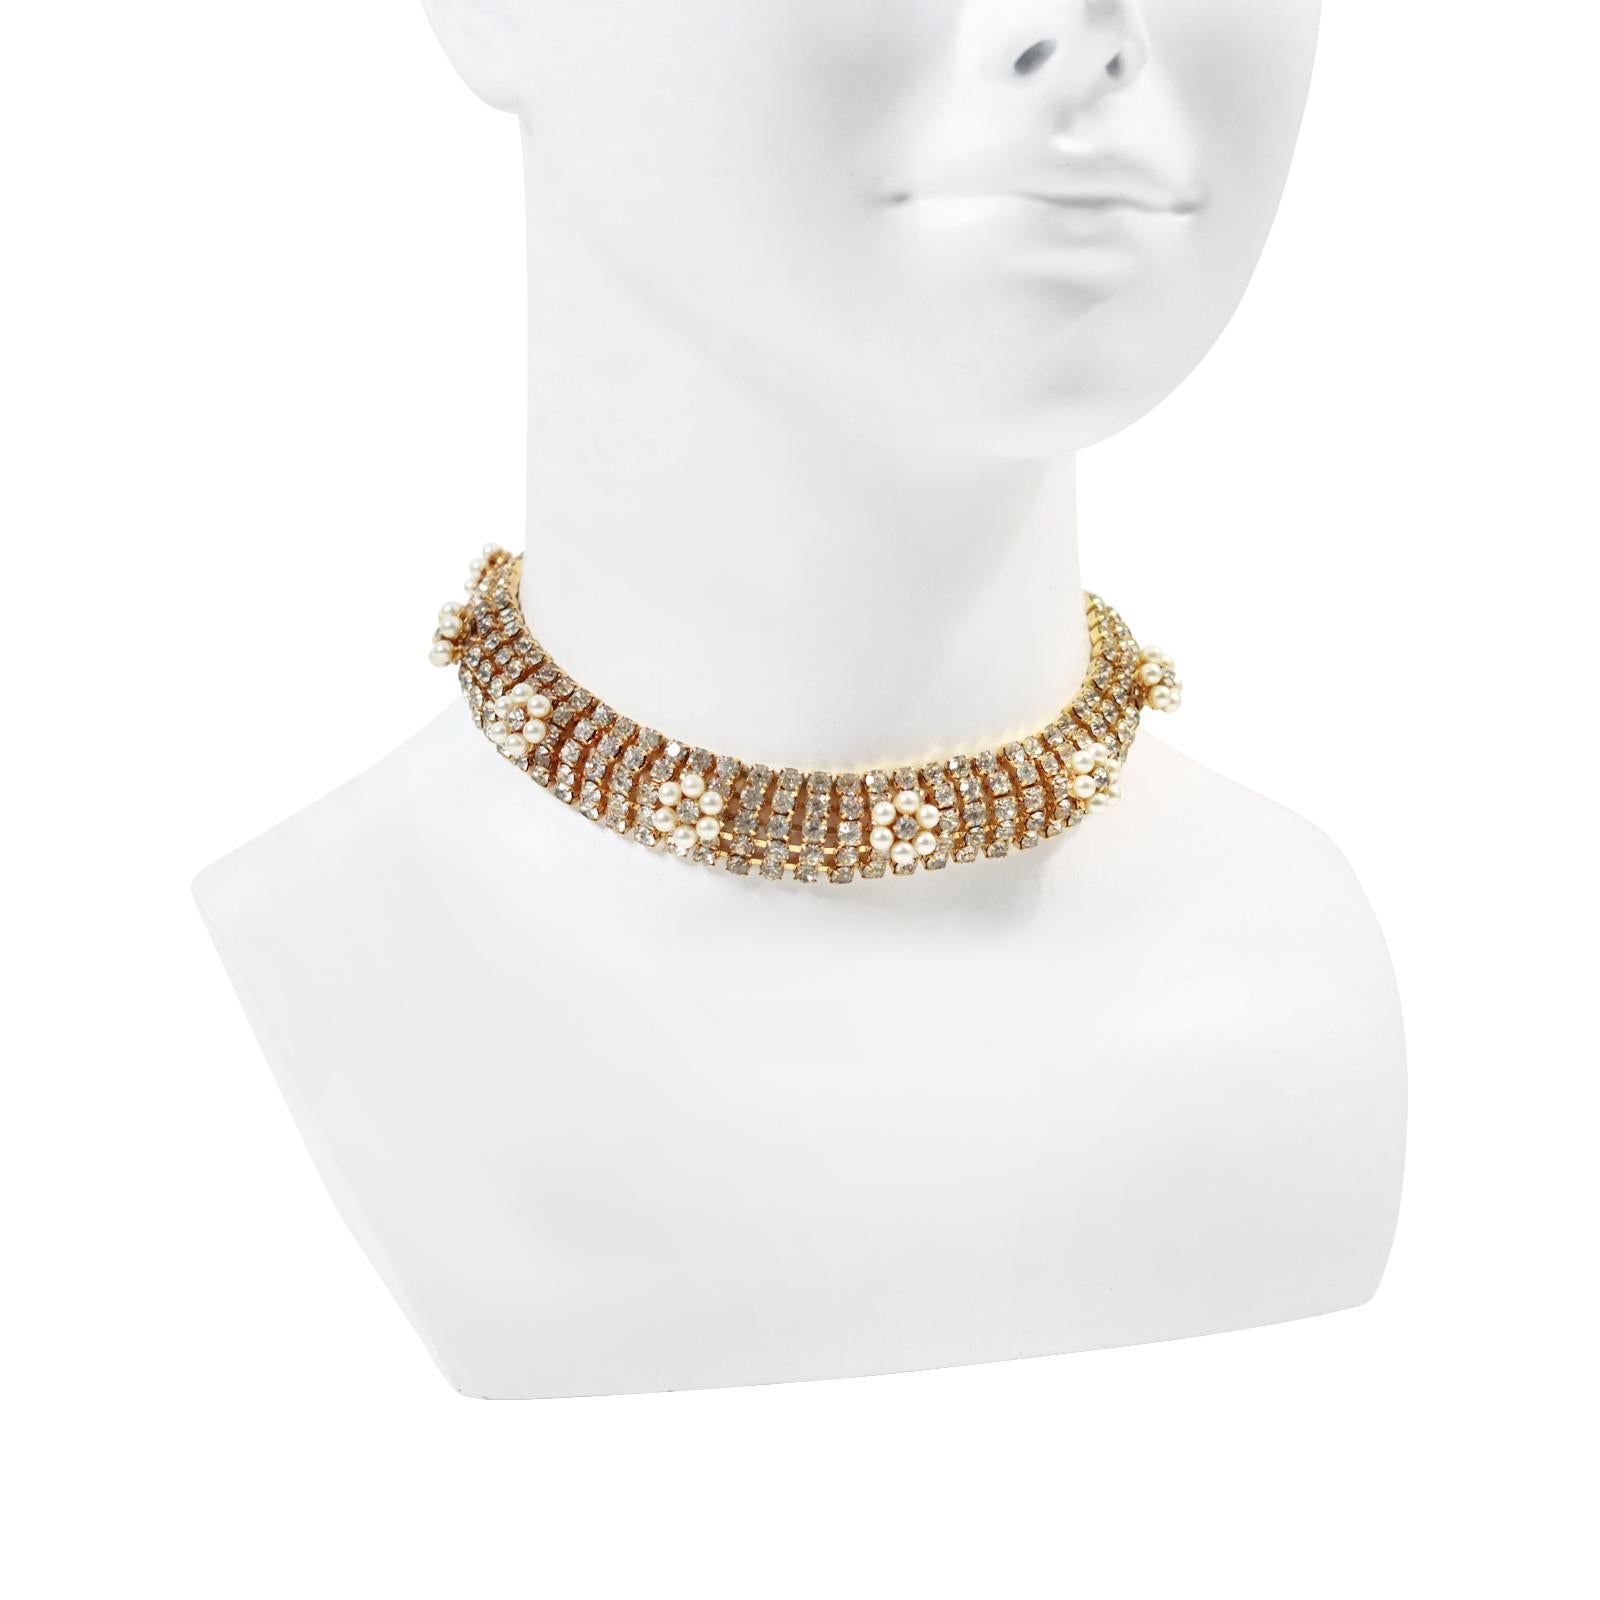 Vintage Diamante Gold Tone with Faux Pearl Mid Size Choker Circa 1970s. This is a 5 row choker with prong set round stones. Then on top are small round flowers or round pieces surrounded by faux pearls with a diamante in the middle.  Just